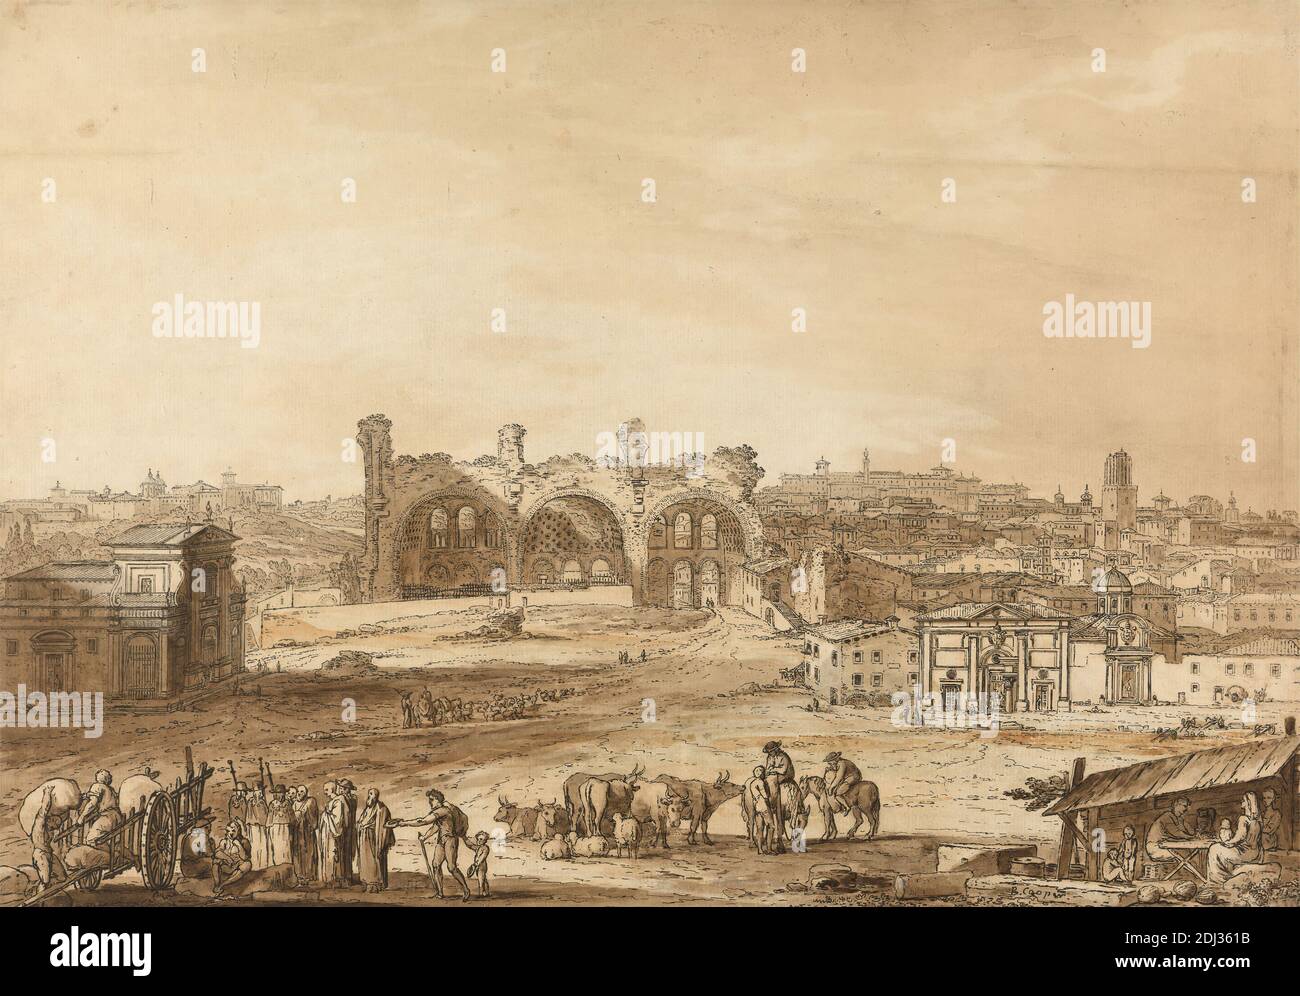 View Across the Campo Vaccino, Rome, Richard Cooper the Younger, 1740–1814, British, c. 1790, Conterproof of an etching, with brown washes, on laid paper, Image: 13 13/16 x 18 13/16in. (35.1 x 47.8cm) and Sheet: 15 x 20in. (38.1 x 50.8cm), Rome Stock Photo